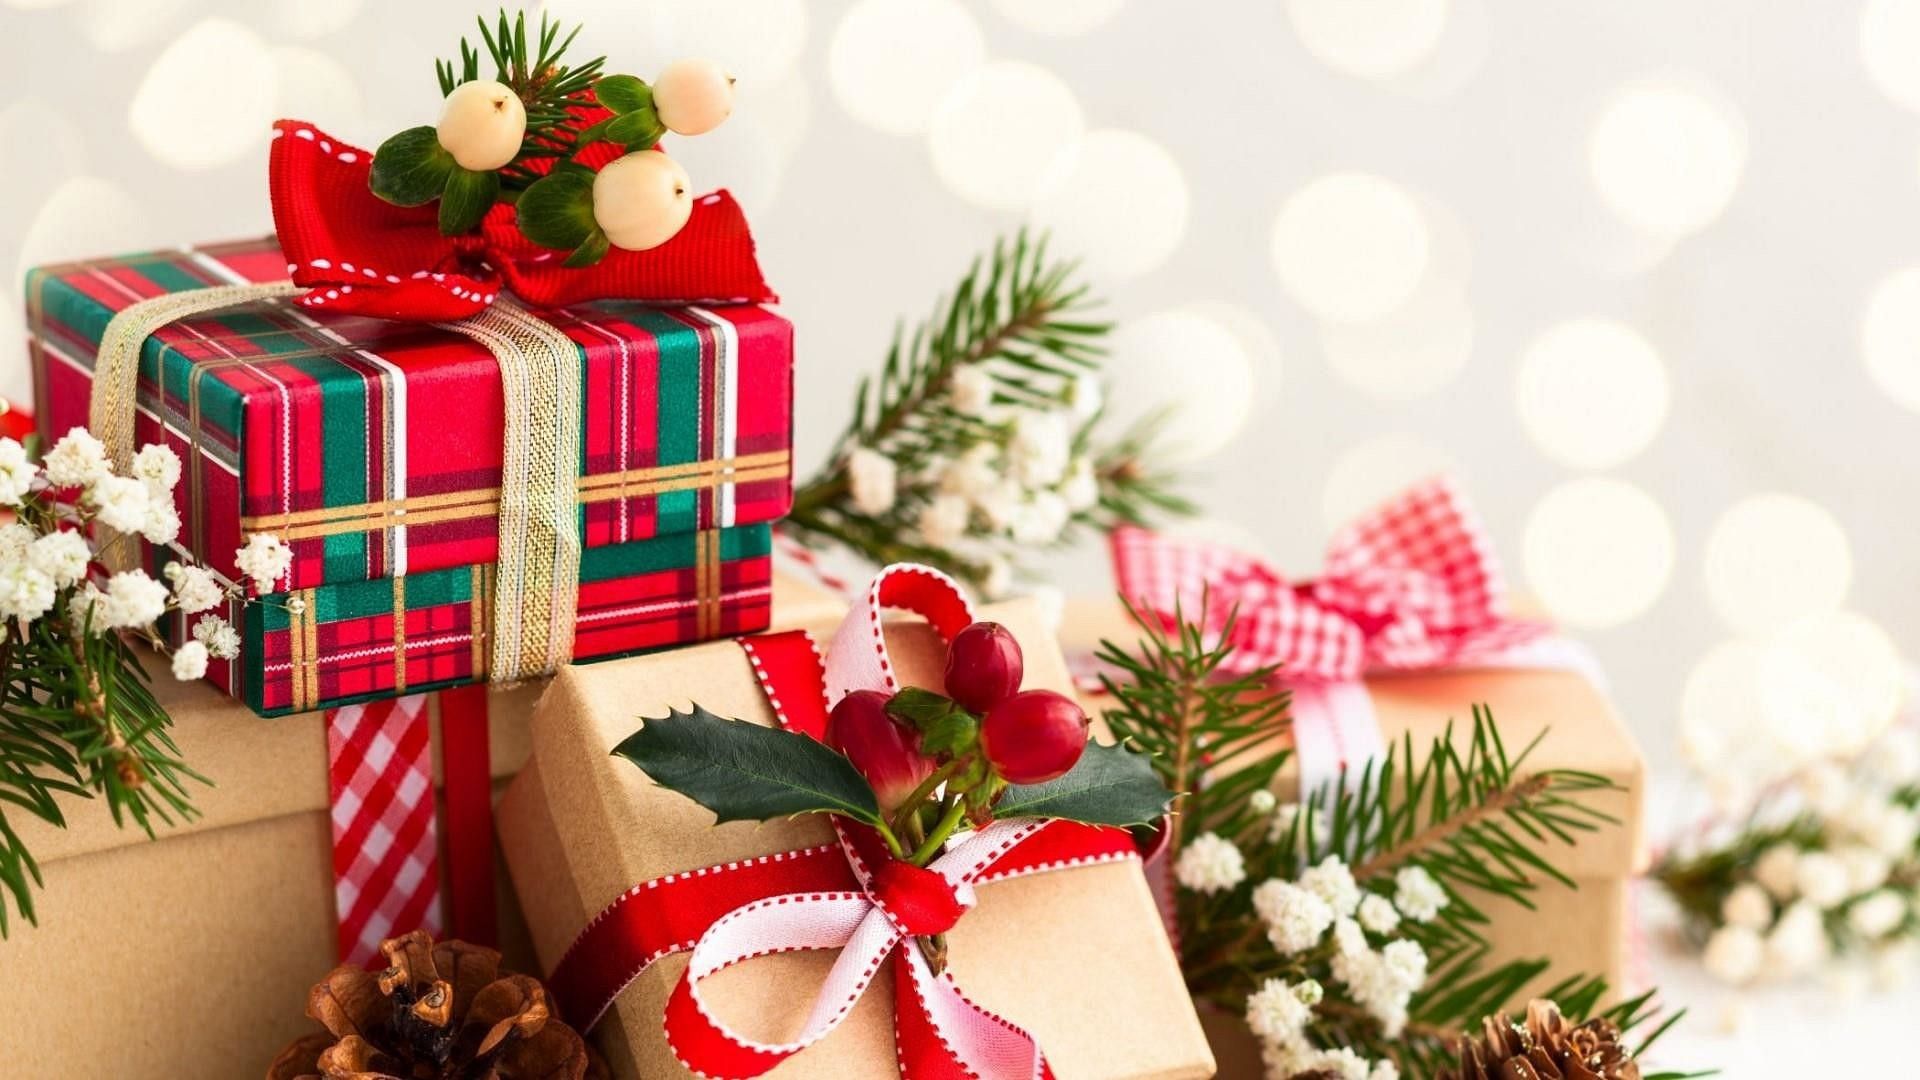 Christmas Gift Ideas: Last Minute Digital Christmas Gift Ideas for Your  Family & Friends